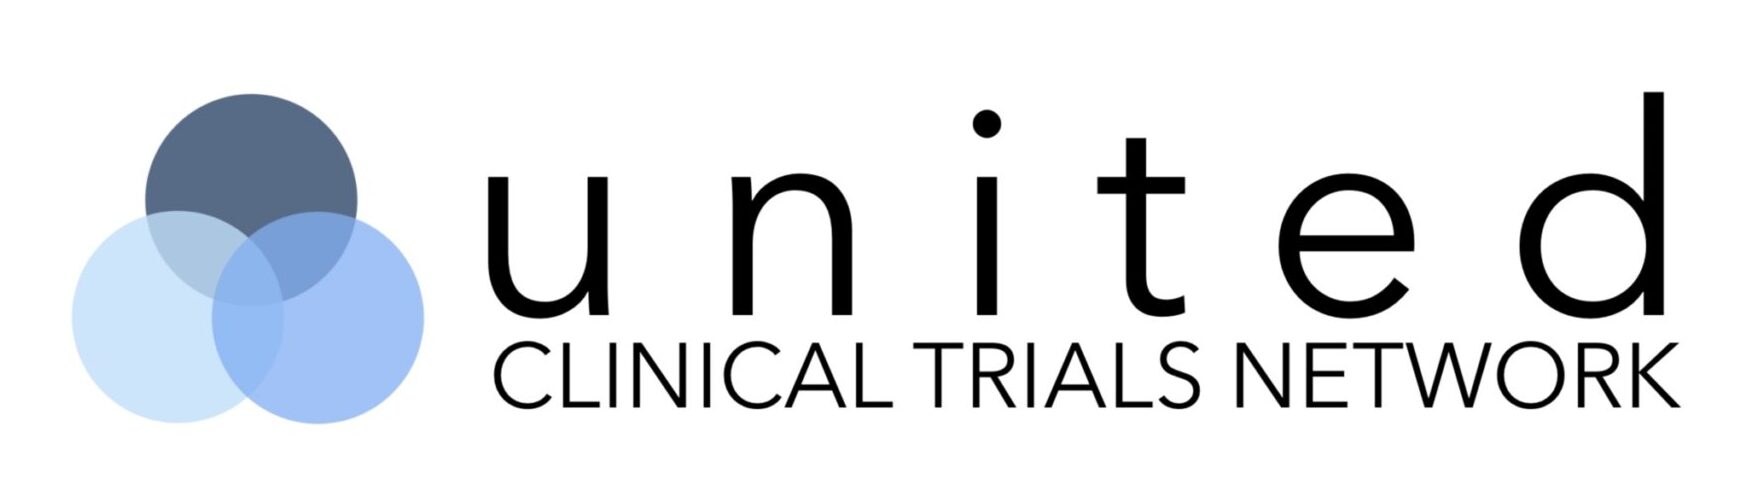 United Clinical Trials Network